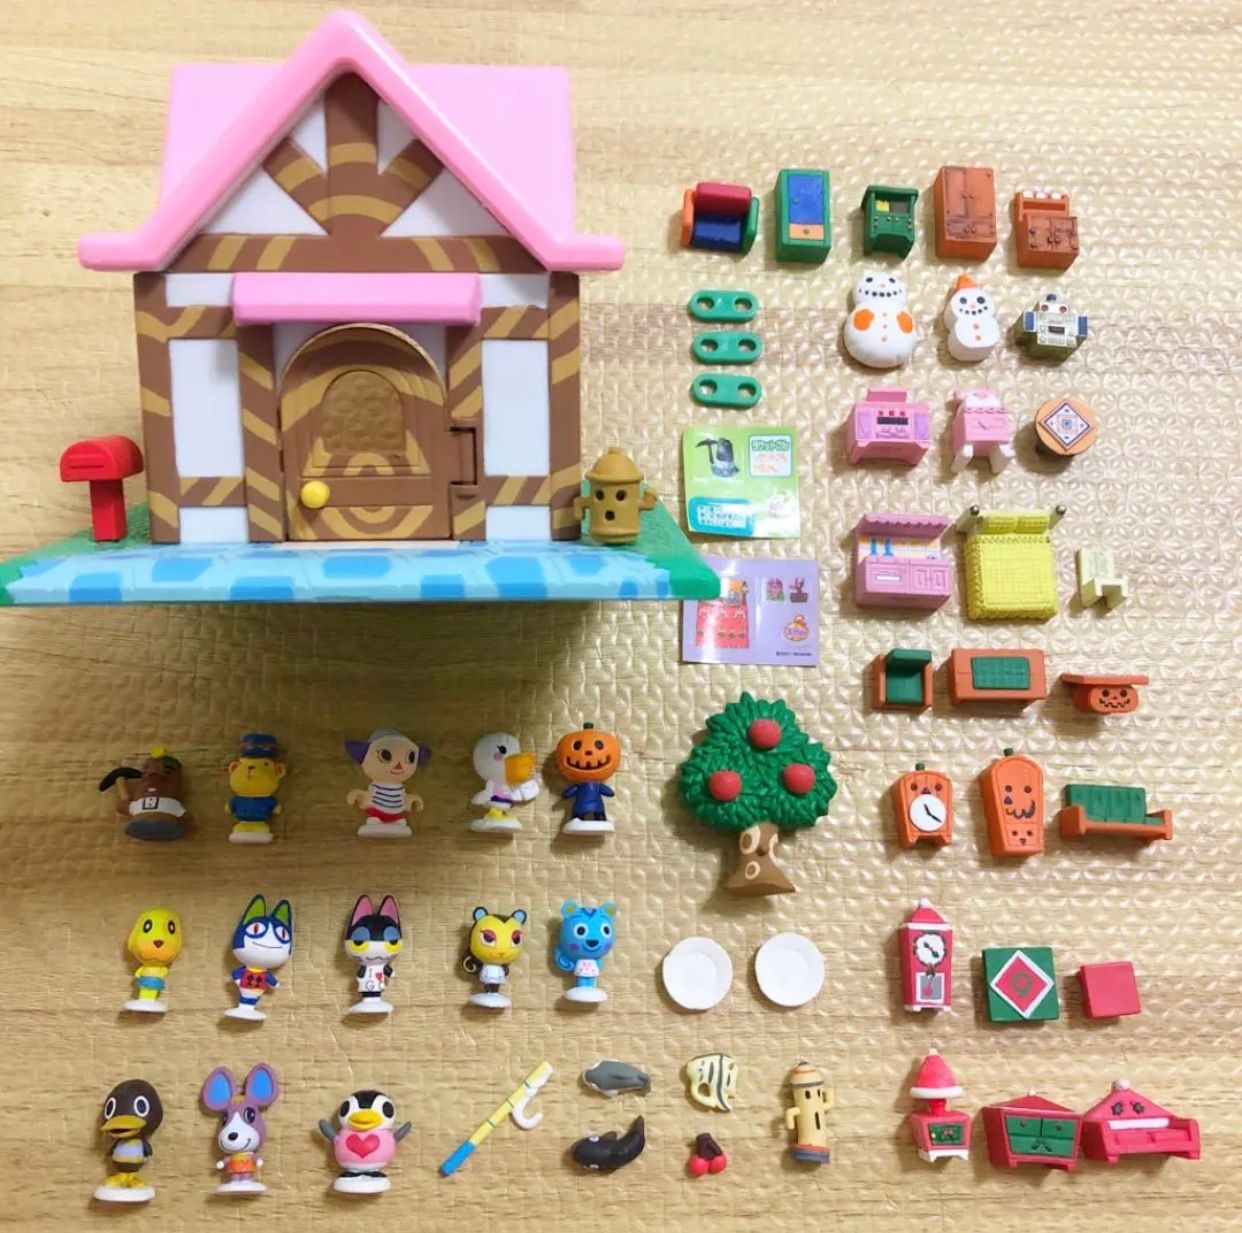 This is an offer made on the Request: Animal crossing figures/houses